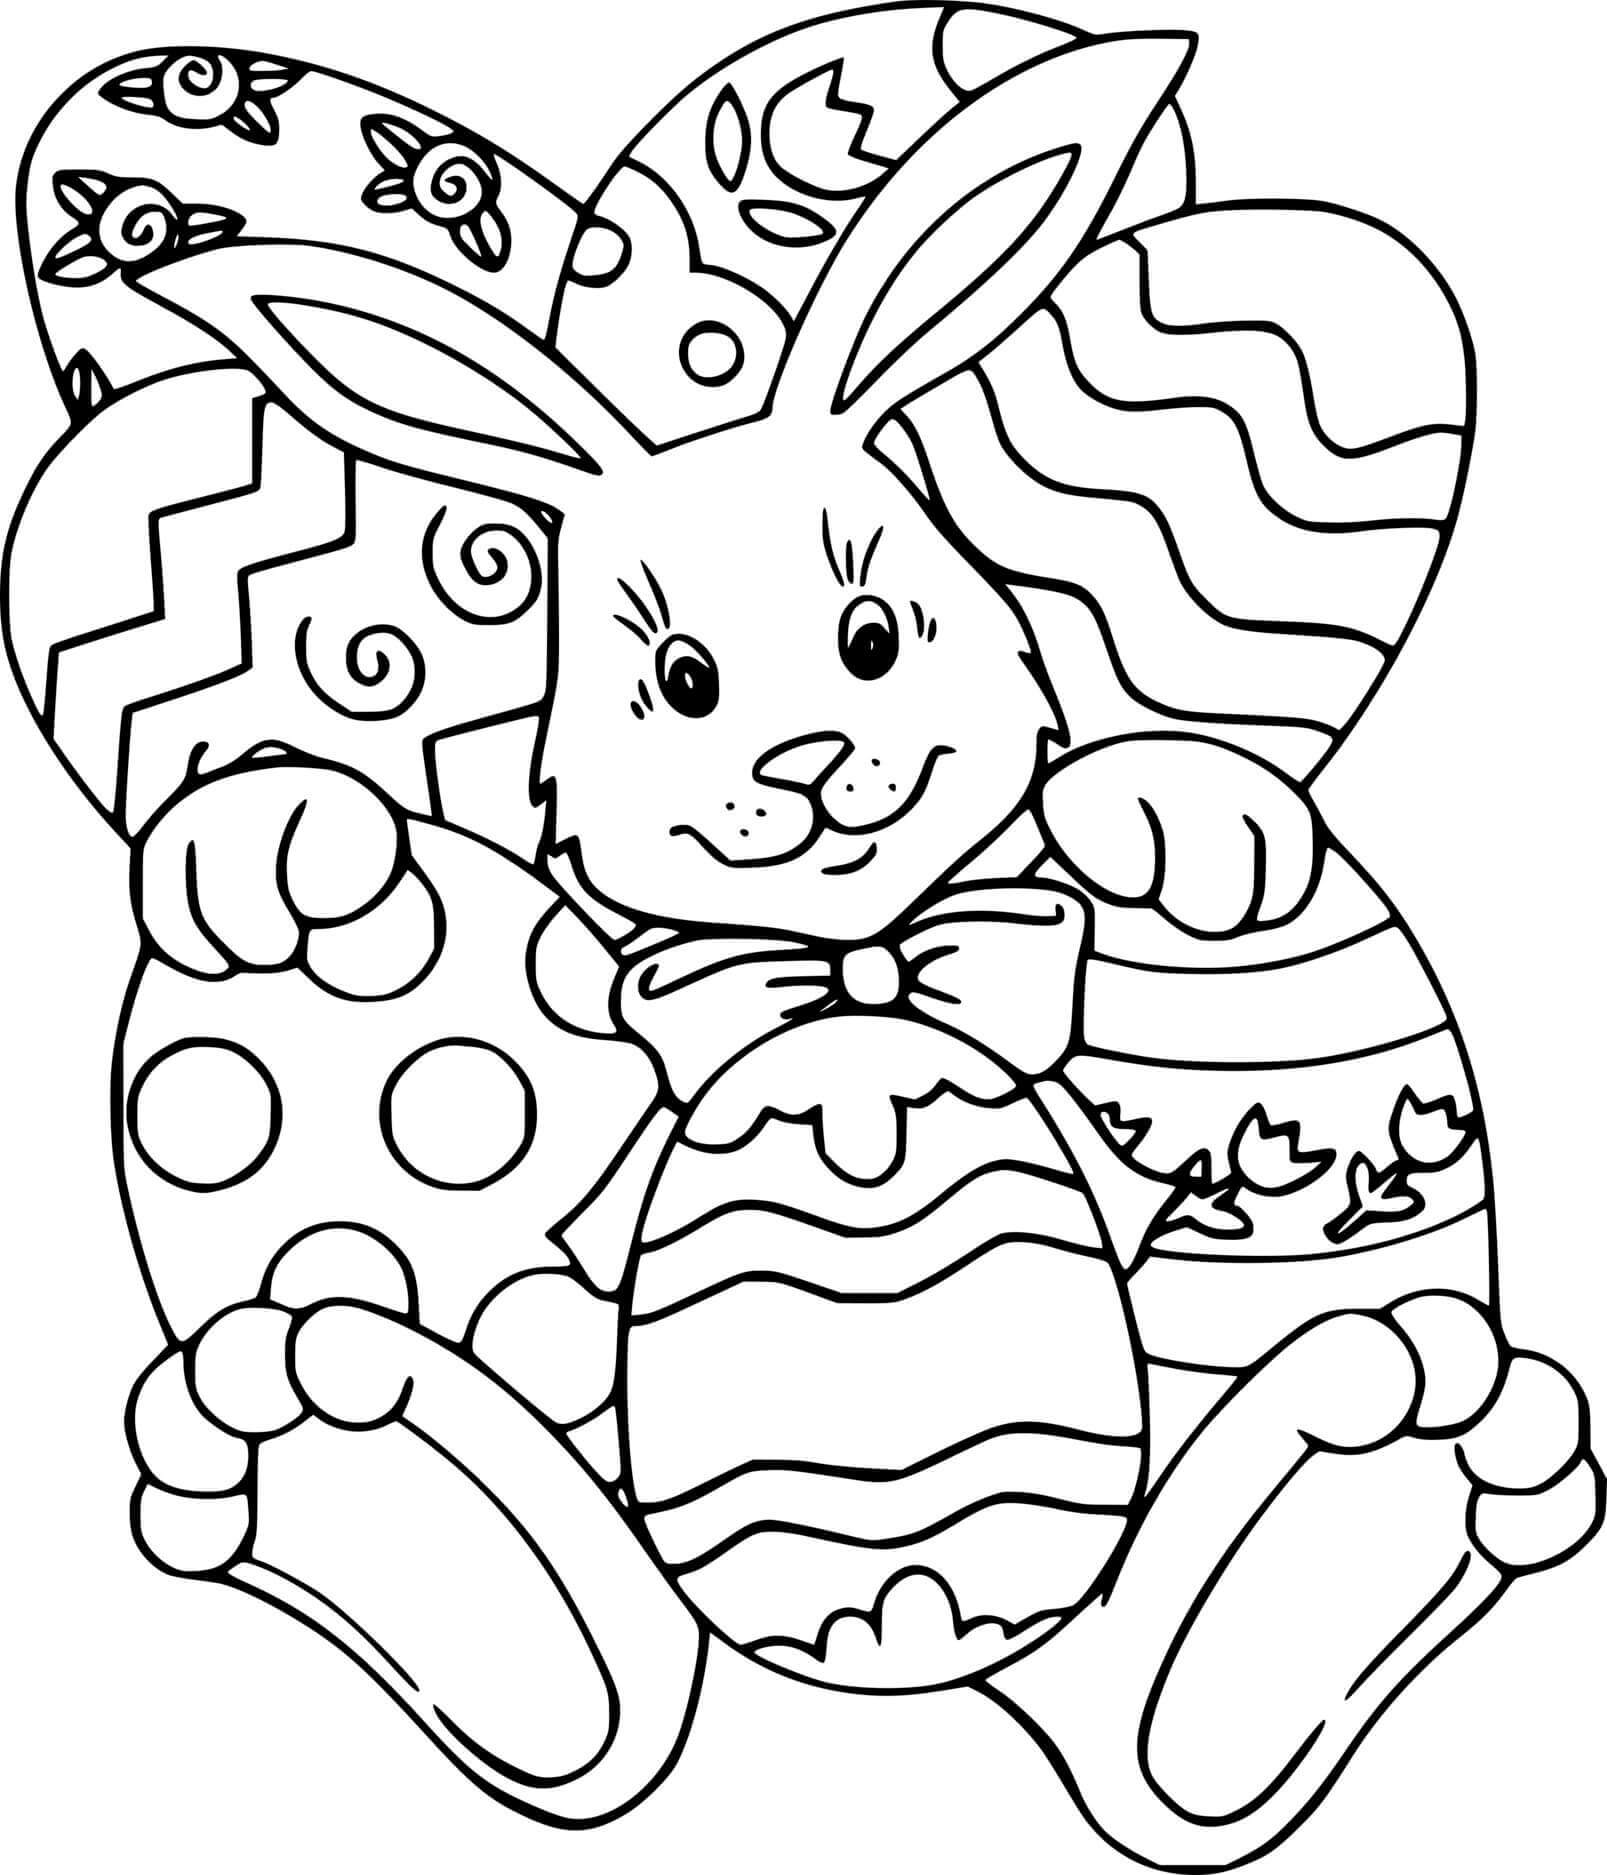 Easter Bunny Sleeping On The Eggs Coloring Page